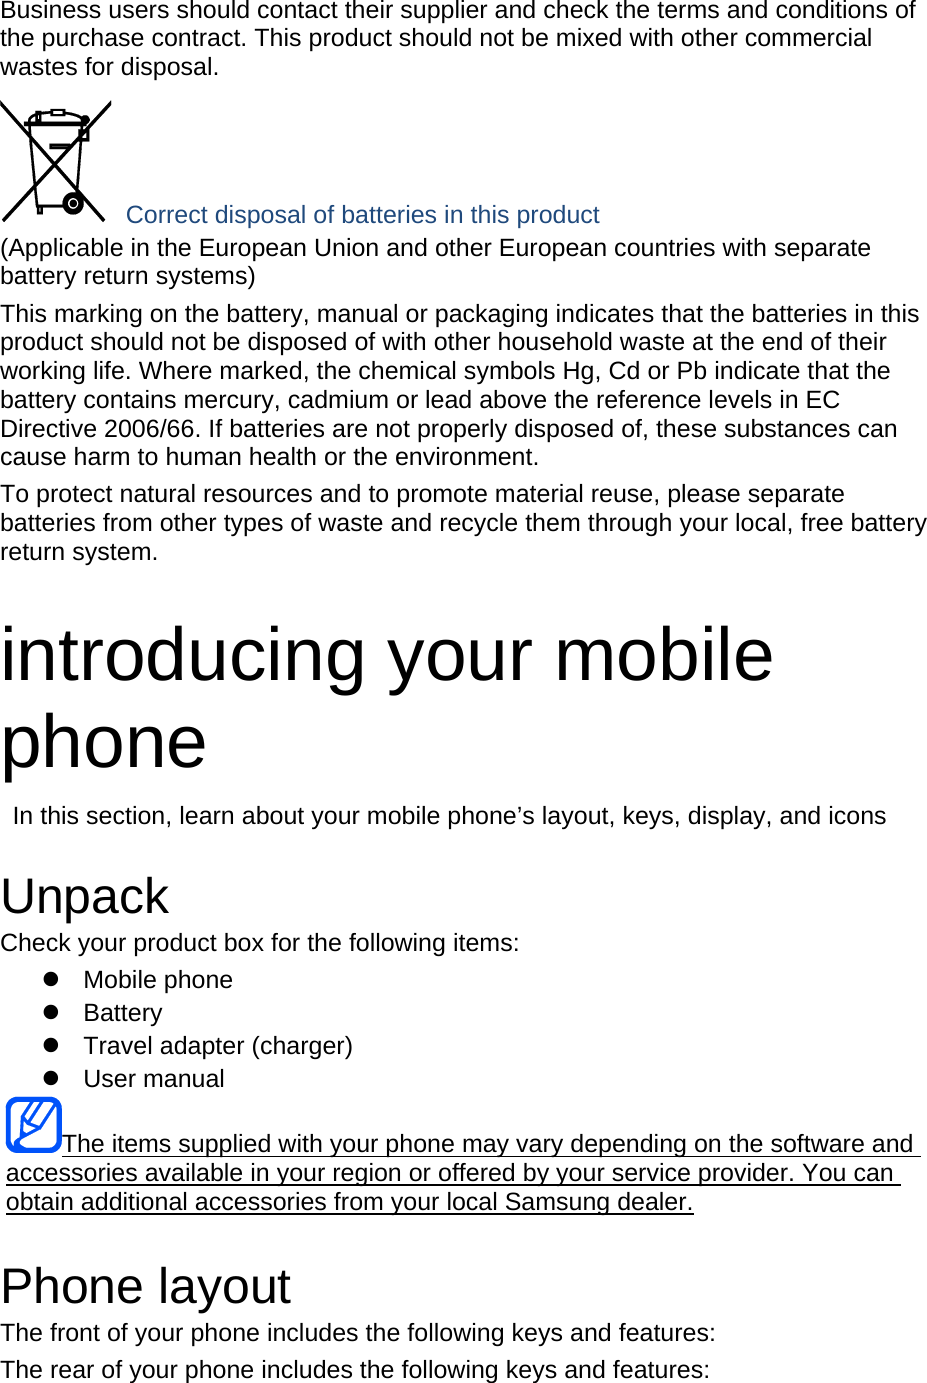 Business users should contact their supplier and check the terms and conditions of the purchase contract. This product should not be mixed with other commercial wastes for disposal.  Correct disposal of batteries in this product (Applicable in the European Union and other European countries with separate battery return systems) This marking on the battery, manual or packaging indicates that the batteries in this product should not be disposed of with other household waste at the end of their working life. Where marked, the chemical symbols Hg, Cd or Pb indicate that the battery contains mercury, cadmium or lead above the reference levels in EC Directive 2006/66. If batteries are not properly disposed of, these substances can cause harm to human health or the environment. To protect natural resources and to promote material reuse, please separate batteries from other types of waste and recycle them through your local, free battery return system.  introducing your mobile phone   In this section, learn about your mobile phone’s layout, keys, display, and icons  Unpack Check your product box for the following items: z Mobile phone z Battery z  Travel adapter (charger) z User manual The items supplied with your phone may vary depending on the software and accessories available in your region or offered by your service provider. You can obtain additional accessories from your local Samsung dealer.  Phone layout The front of your phone includes the following keys and features: The rear of your phone includes the following keys and features: 